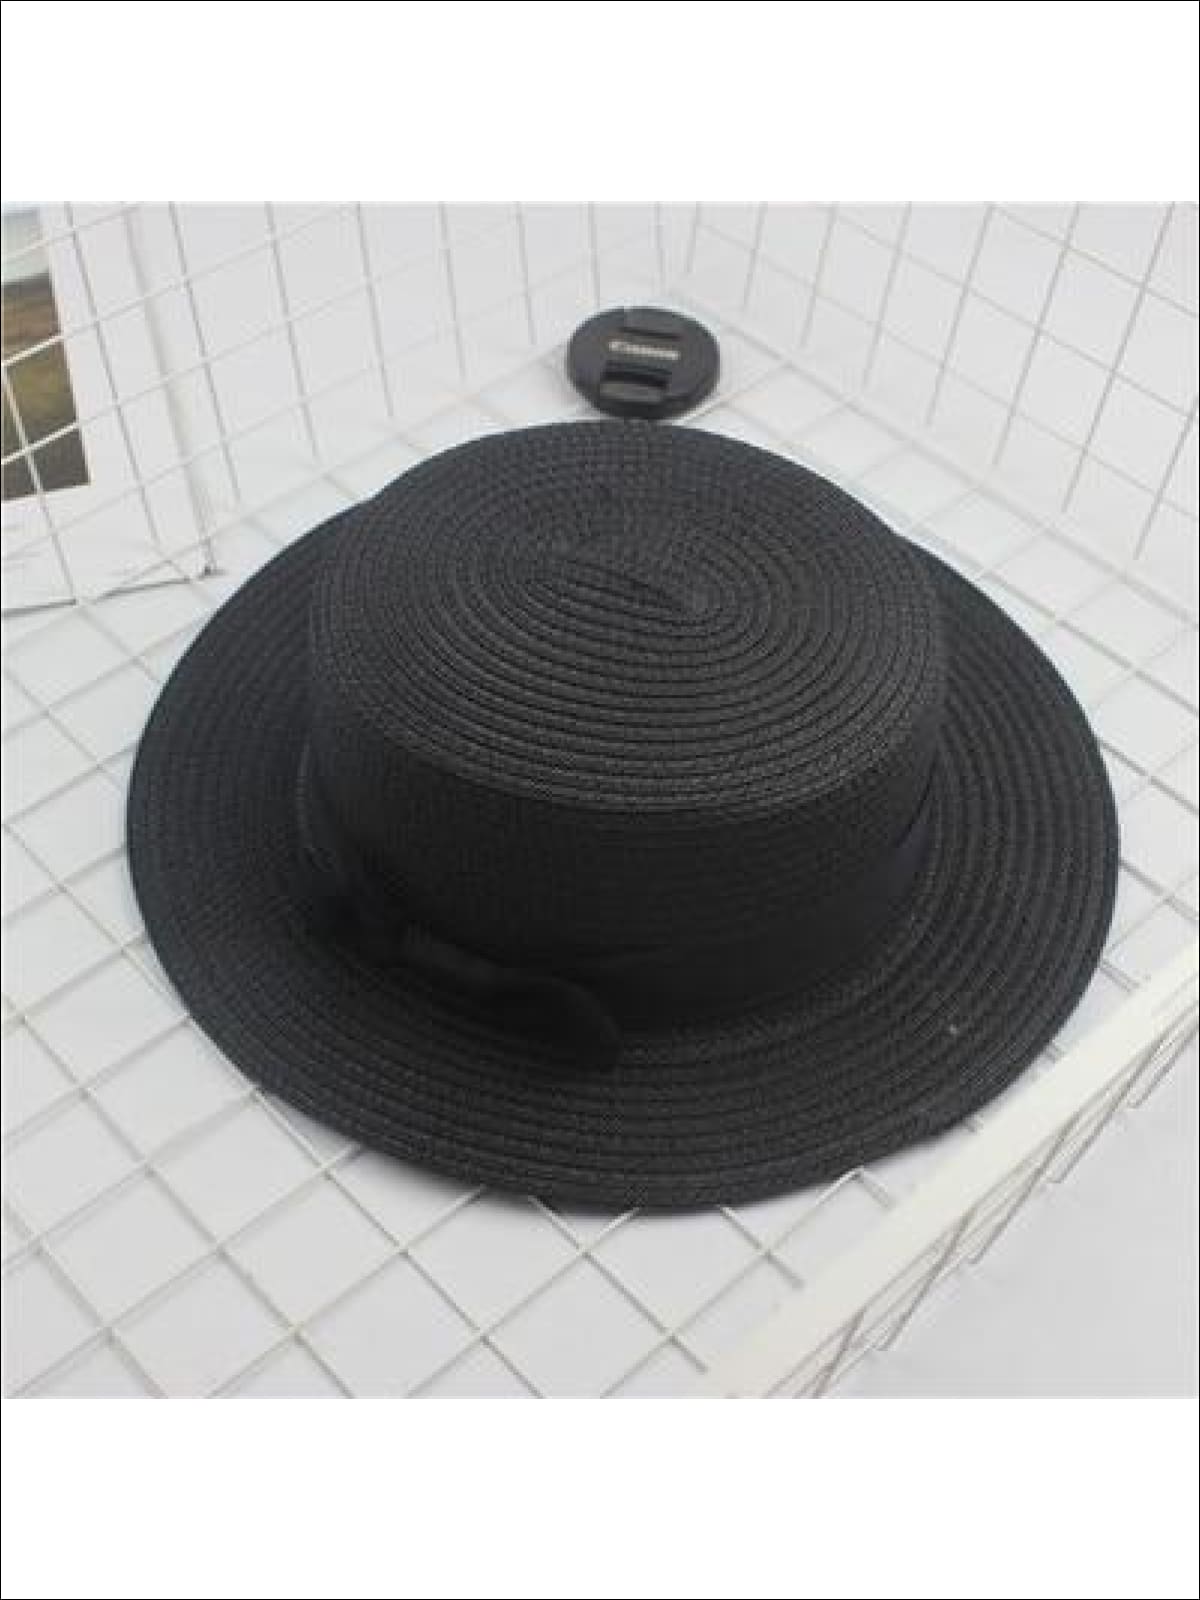 https://cdn.shopify.com/s/files/1/0996/1812/products/girls-woven-straw-fedora-hat-with-bow-tie-multiple-color-options-black-one-size-19-99-and-under-20-39-40-59-aqua-beige-hats-mia-belle-overseas-fulfillment-baby_501.jpg?v=1577279939